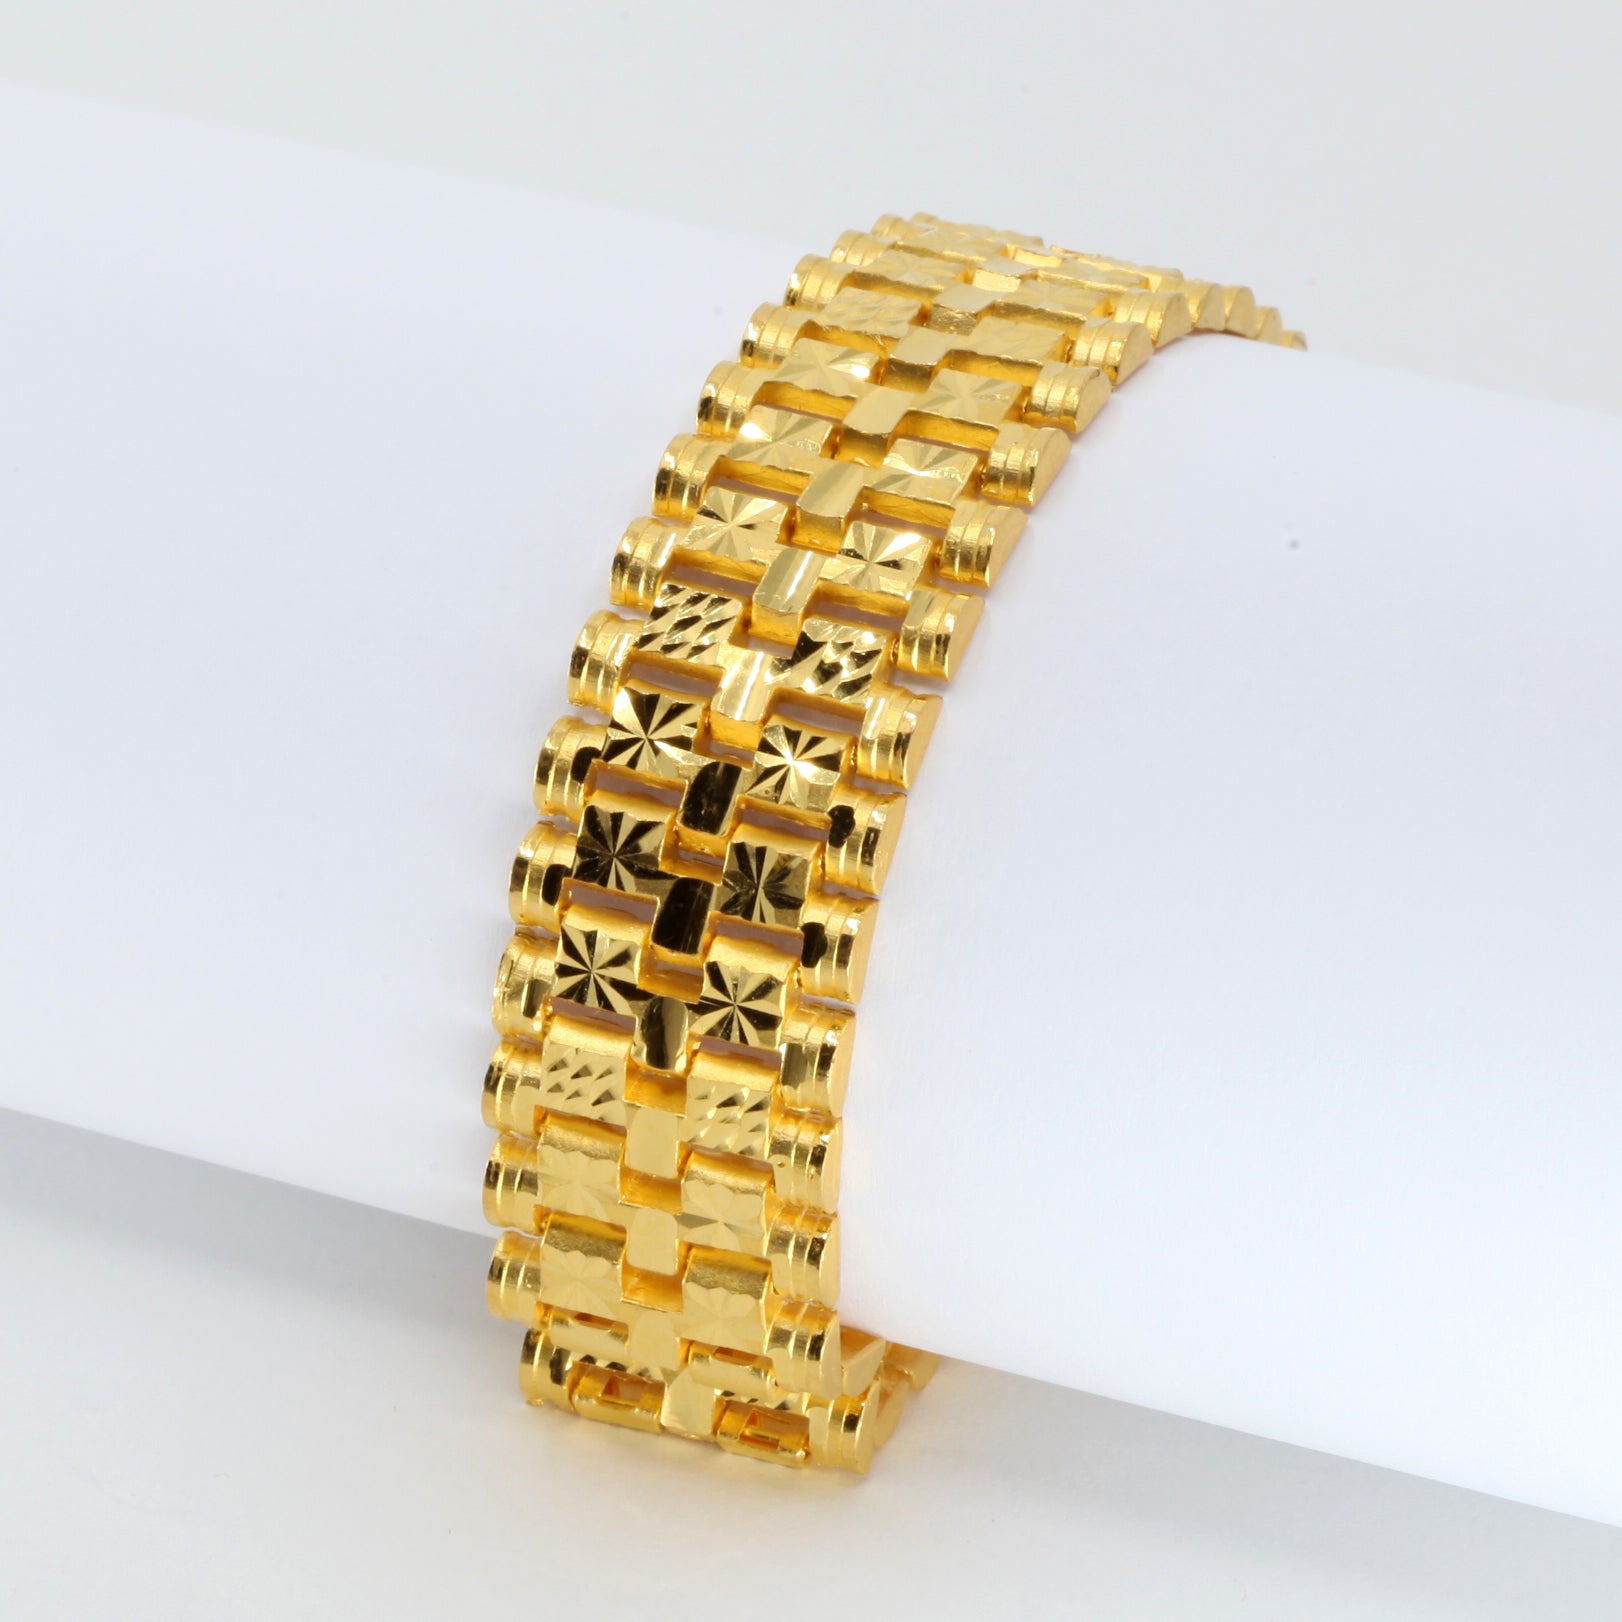 18K Yellow Gold Filled Herringbone 24k Gold Bracelet For Women And Men  Classic Solid Jewelry Accessory 21cm From Ai824, $11.17 | DHgate.Com